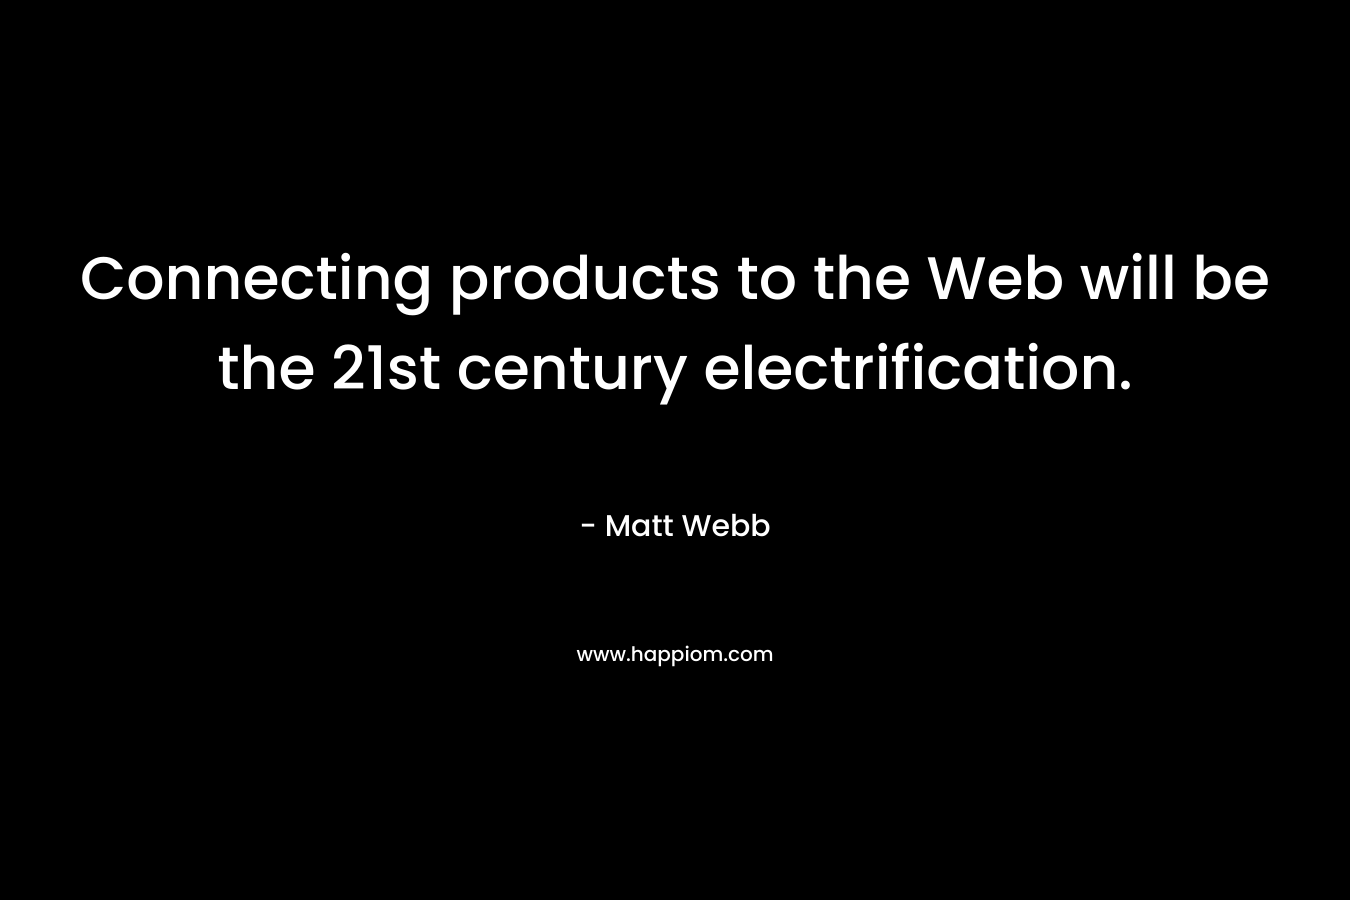 Connecting products to the Web will be the 21st century electrification.